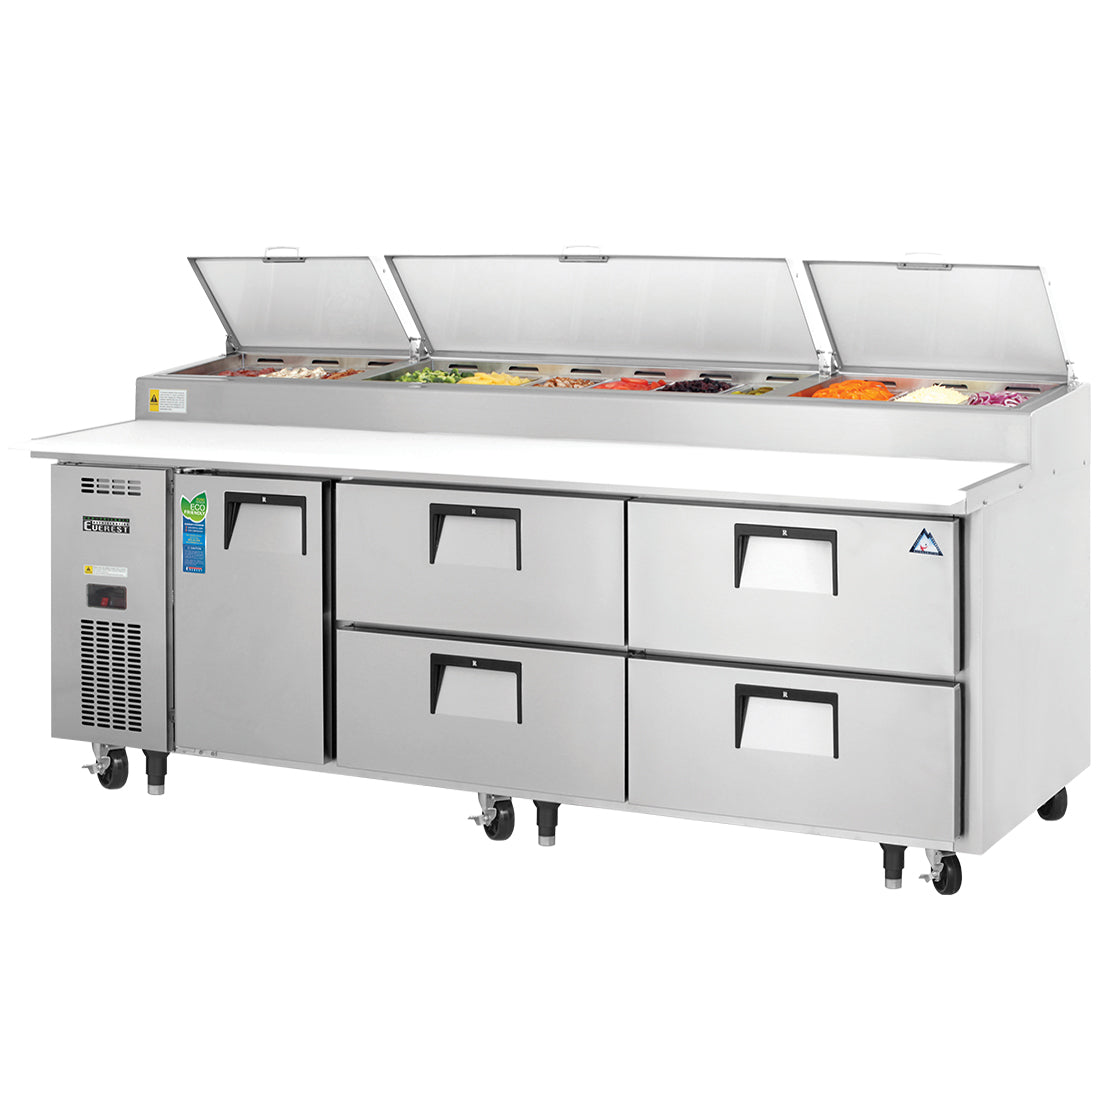 Everest EP Series-EPPR3-D4 Three Section One Door/Four Drawer Side Mount Pizza Prep Table - 30 Cu. Ft.